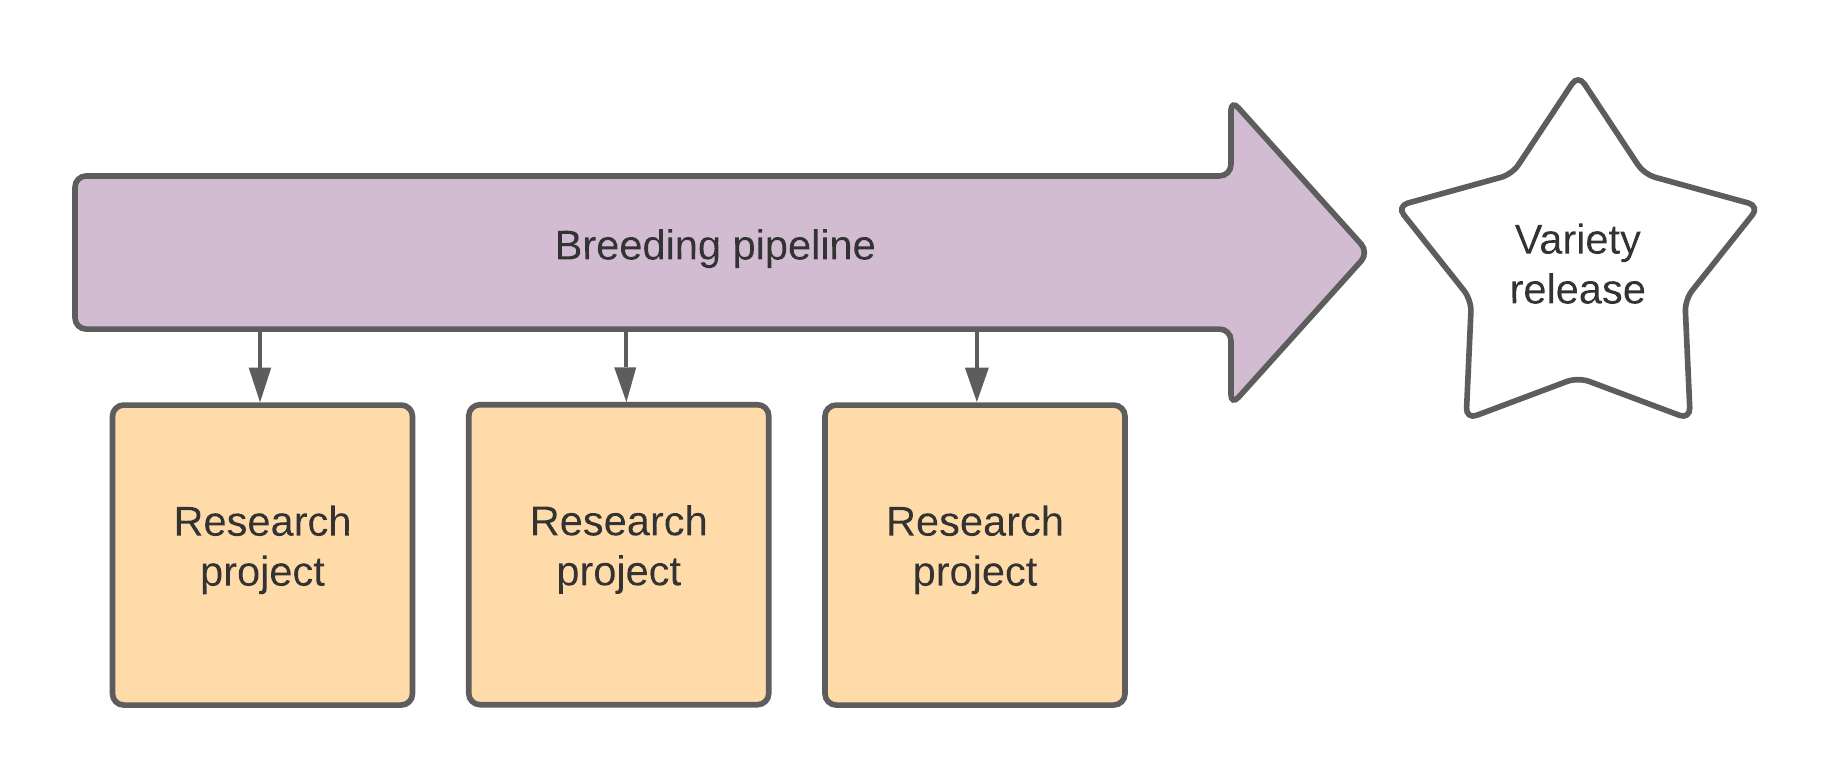 Research projects further the breeding process